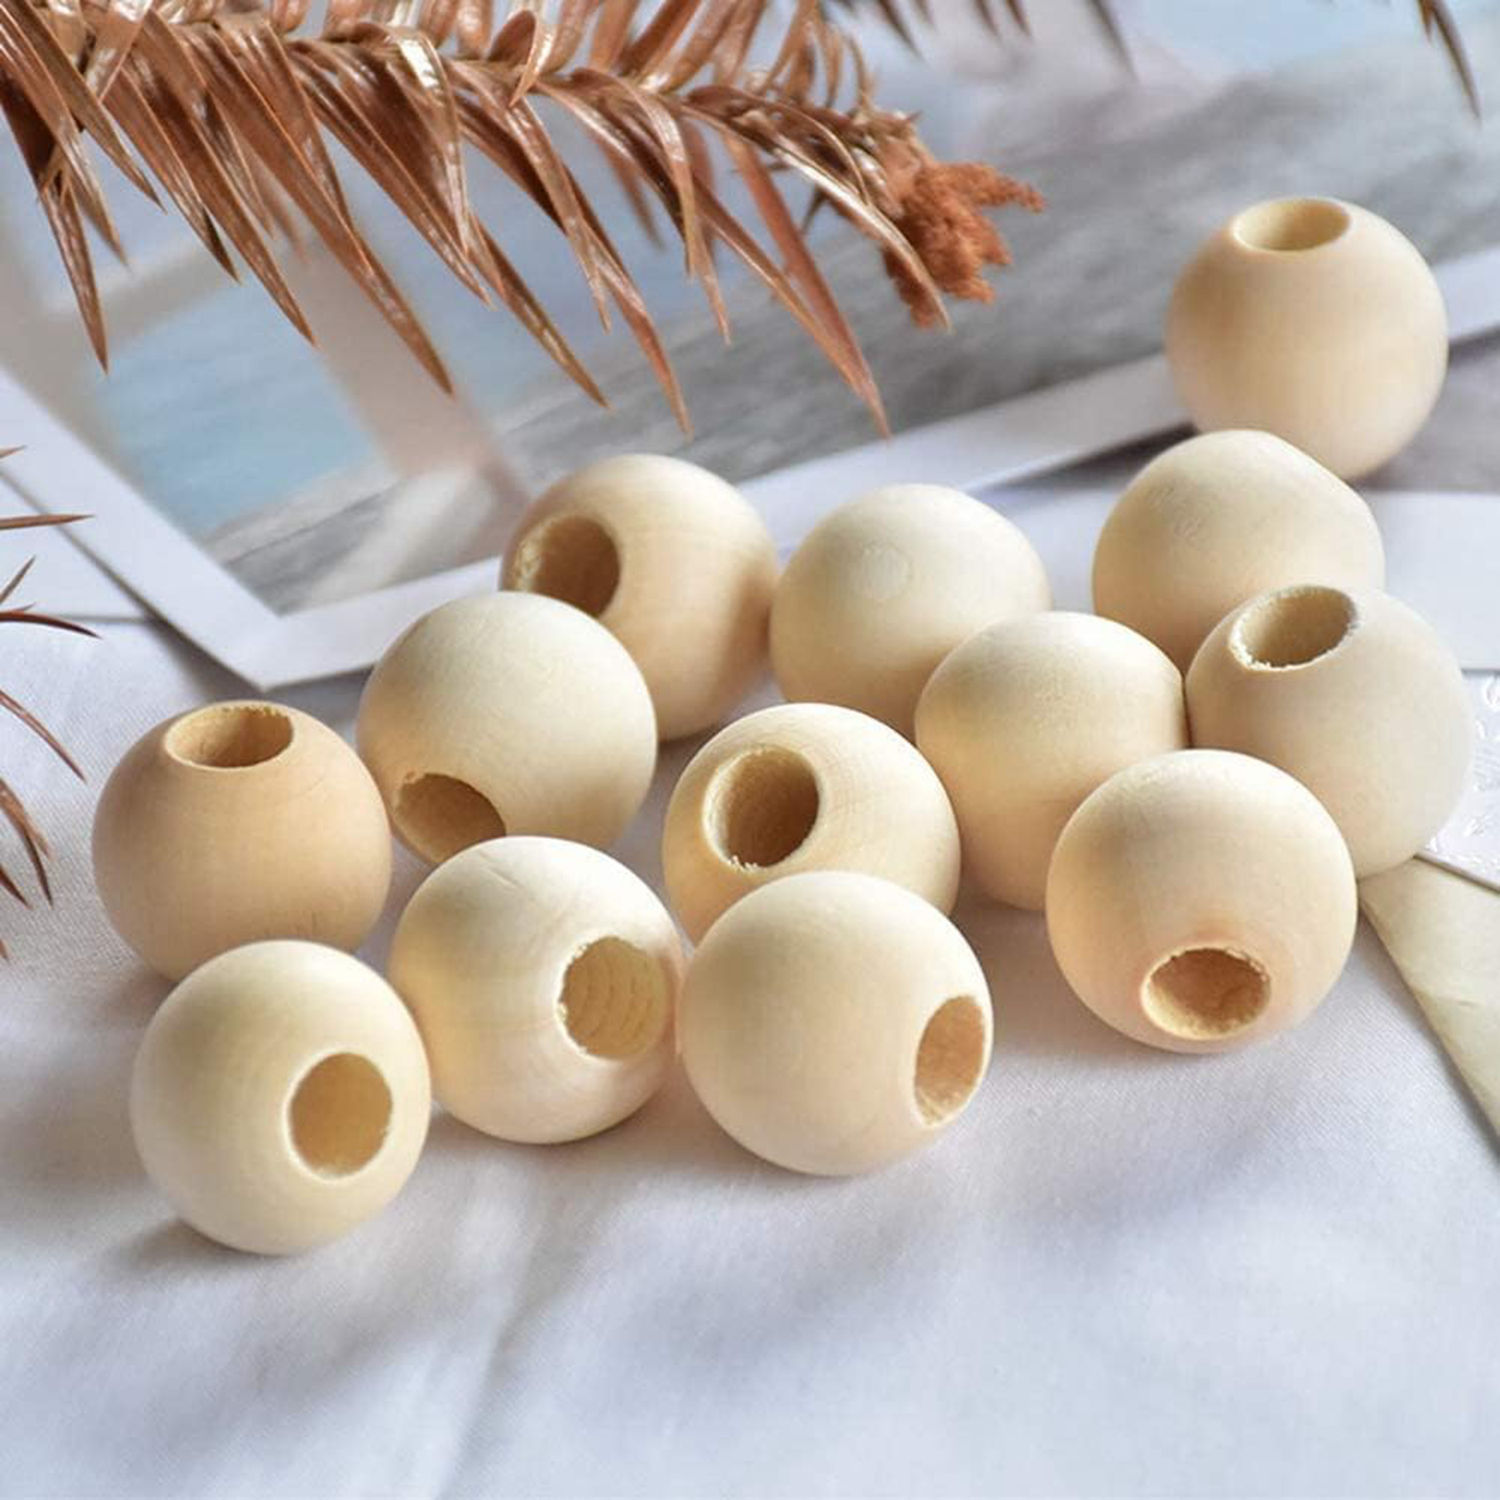  VABNEER Wooden Beads Natural Beads 320Pcs Round Wood Beads for  Crafts DIY Handmade Decorations Jewellery Craft Making, 6 Sizes(10mm,  12mm,14mm, 18mm, 20mm, 25mm) : Arts, Crafts & Sewing